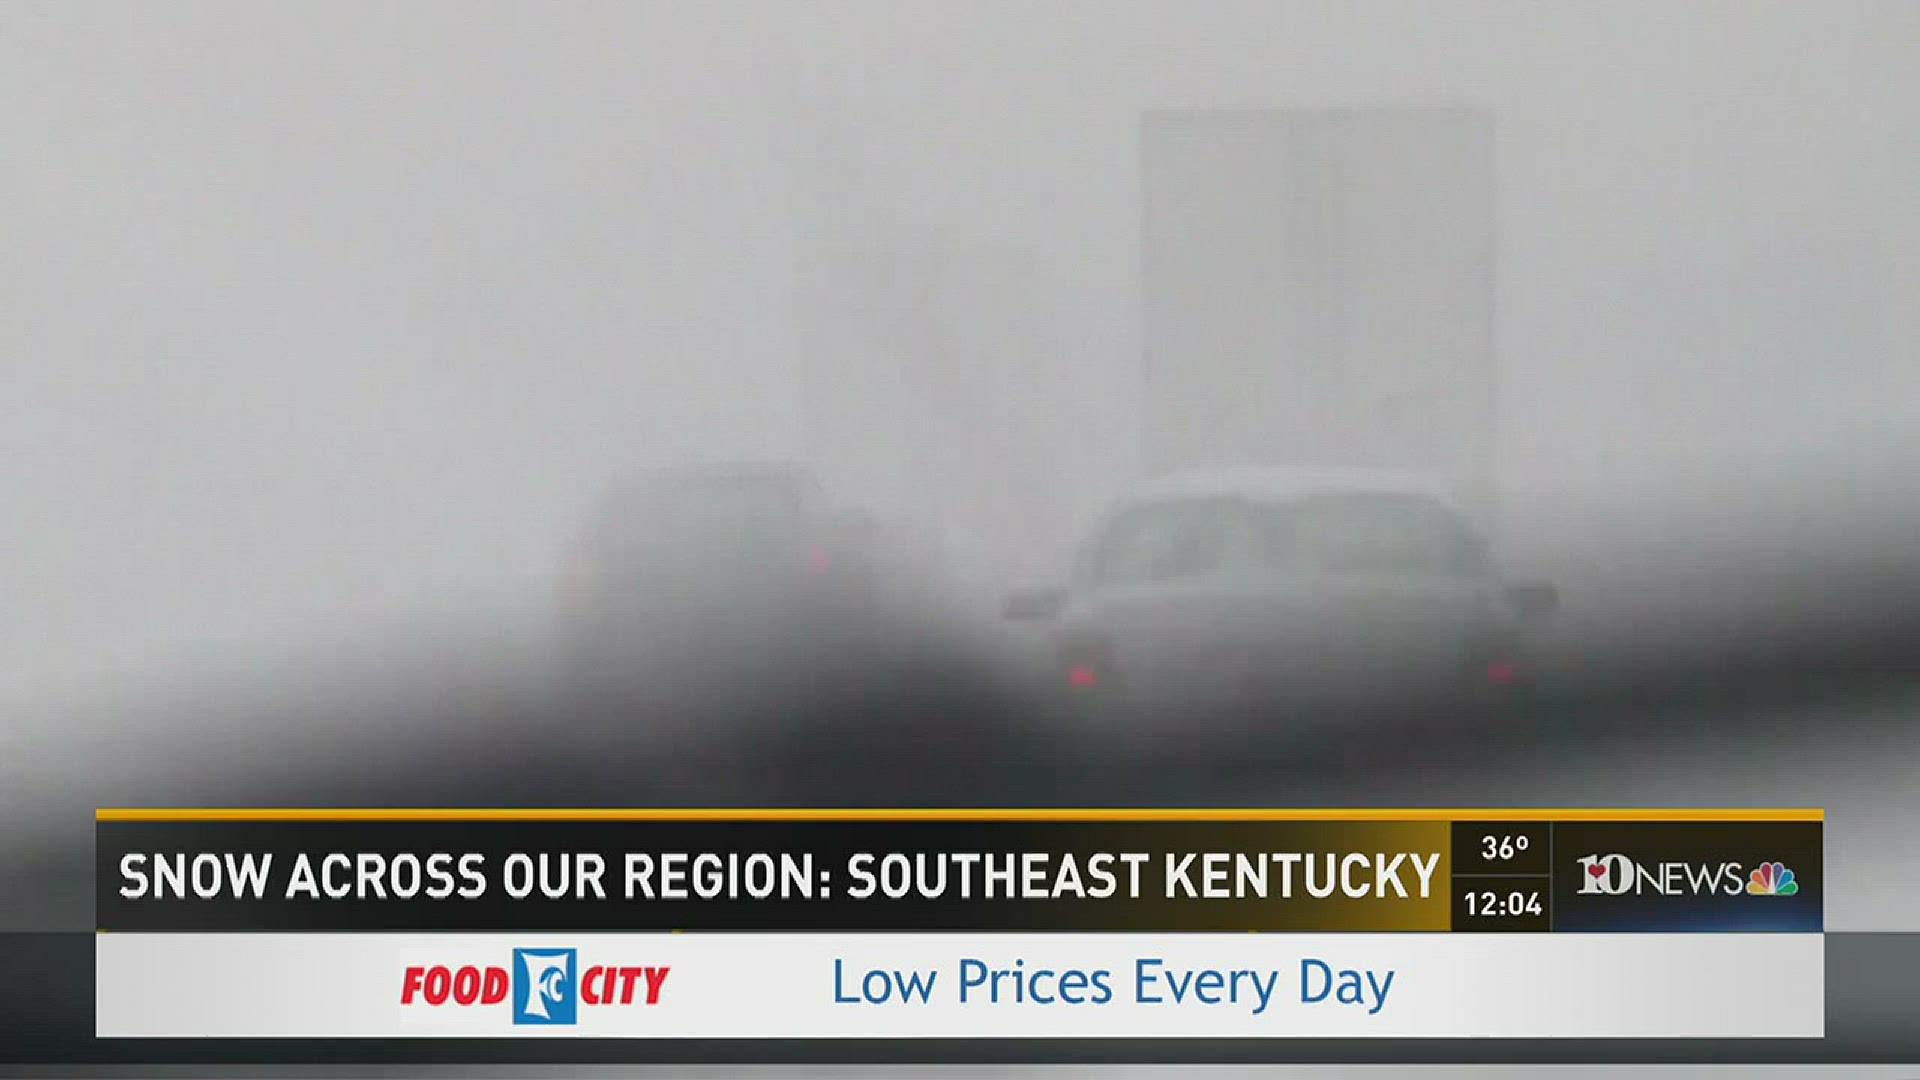 10News has team coverage of expected snow throughout East Tennessee and Southeast Kentucky.